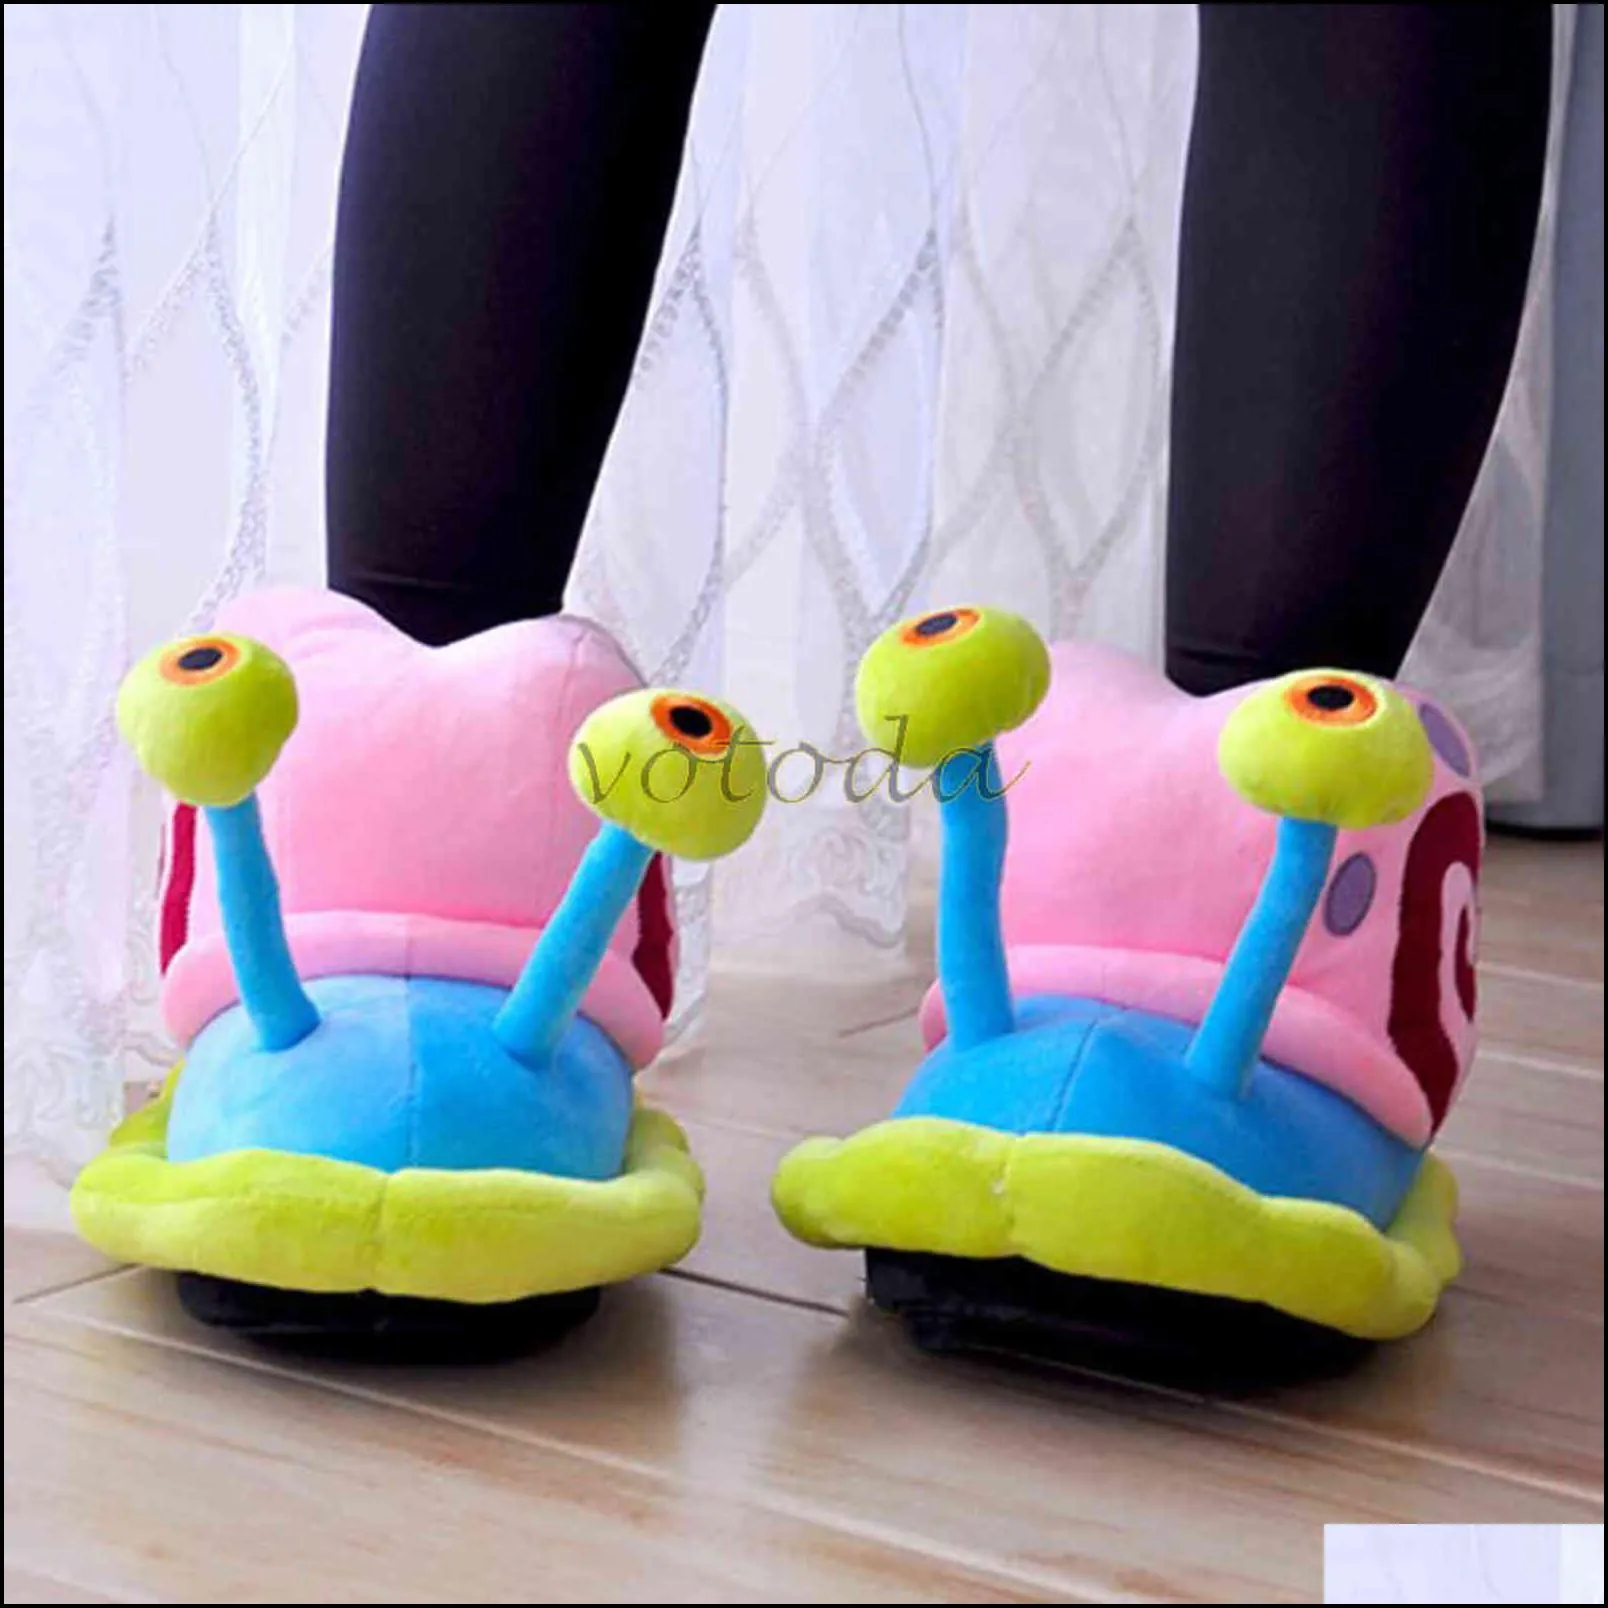 slippers home plush shoes flat slides cotton slipper flop winter cartoon women funny cute snail indoor cozy furry warm